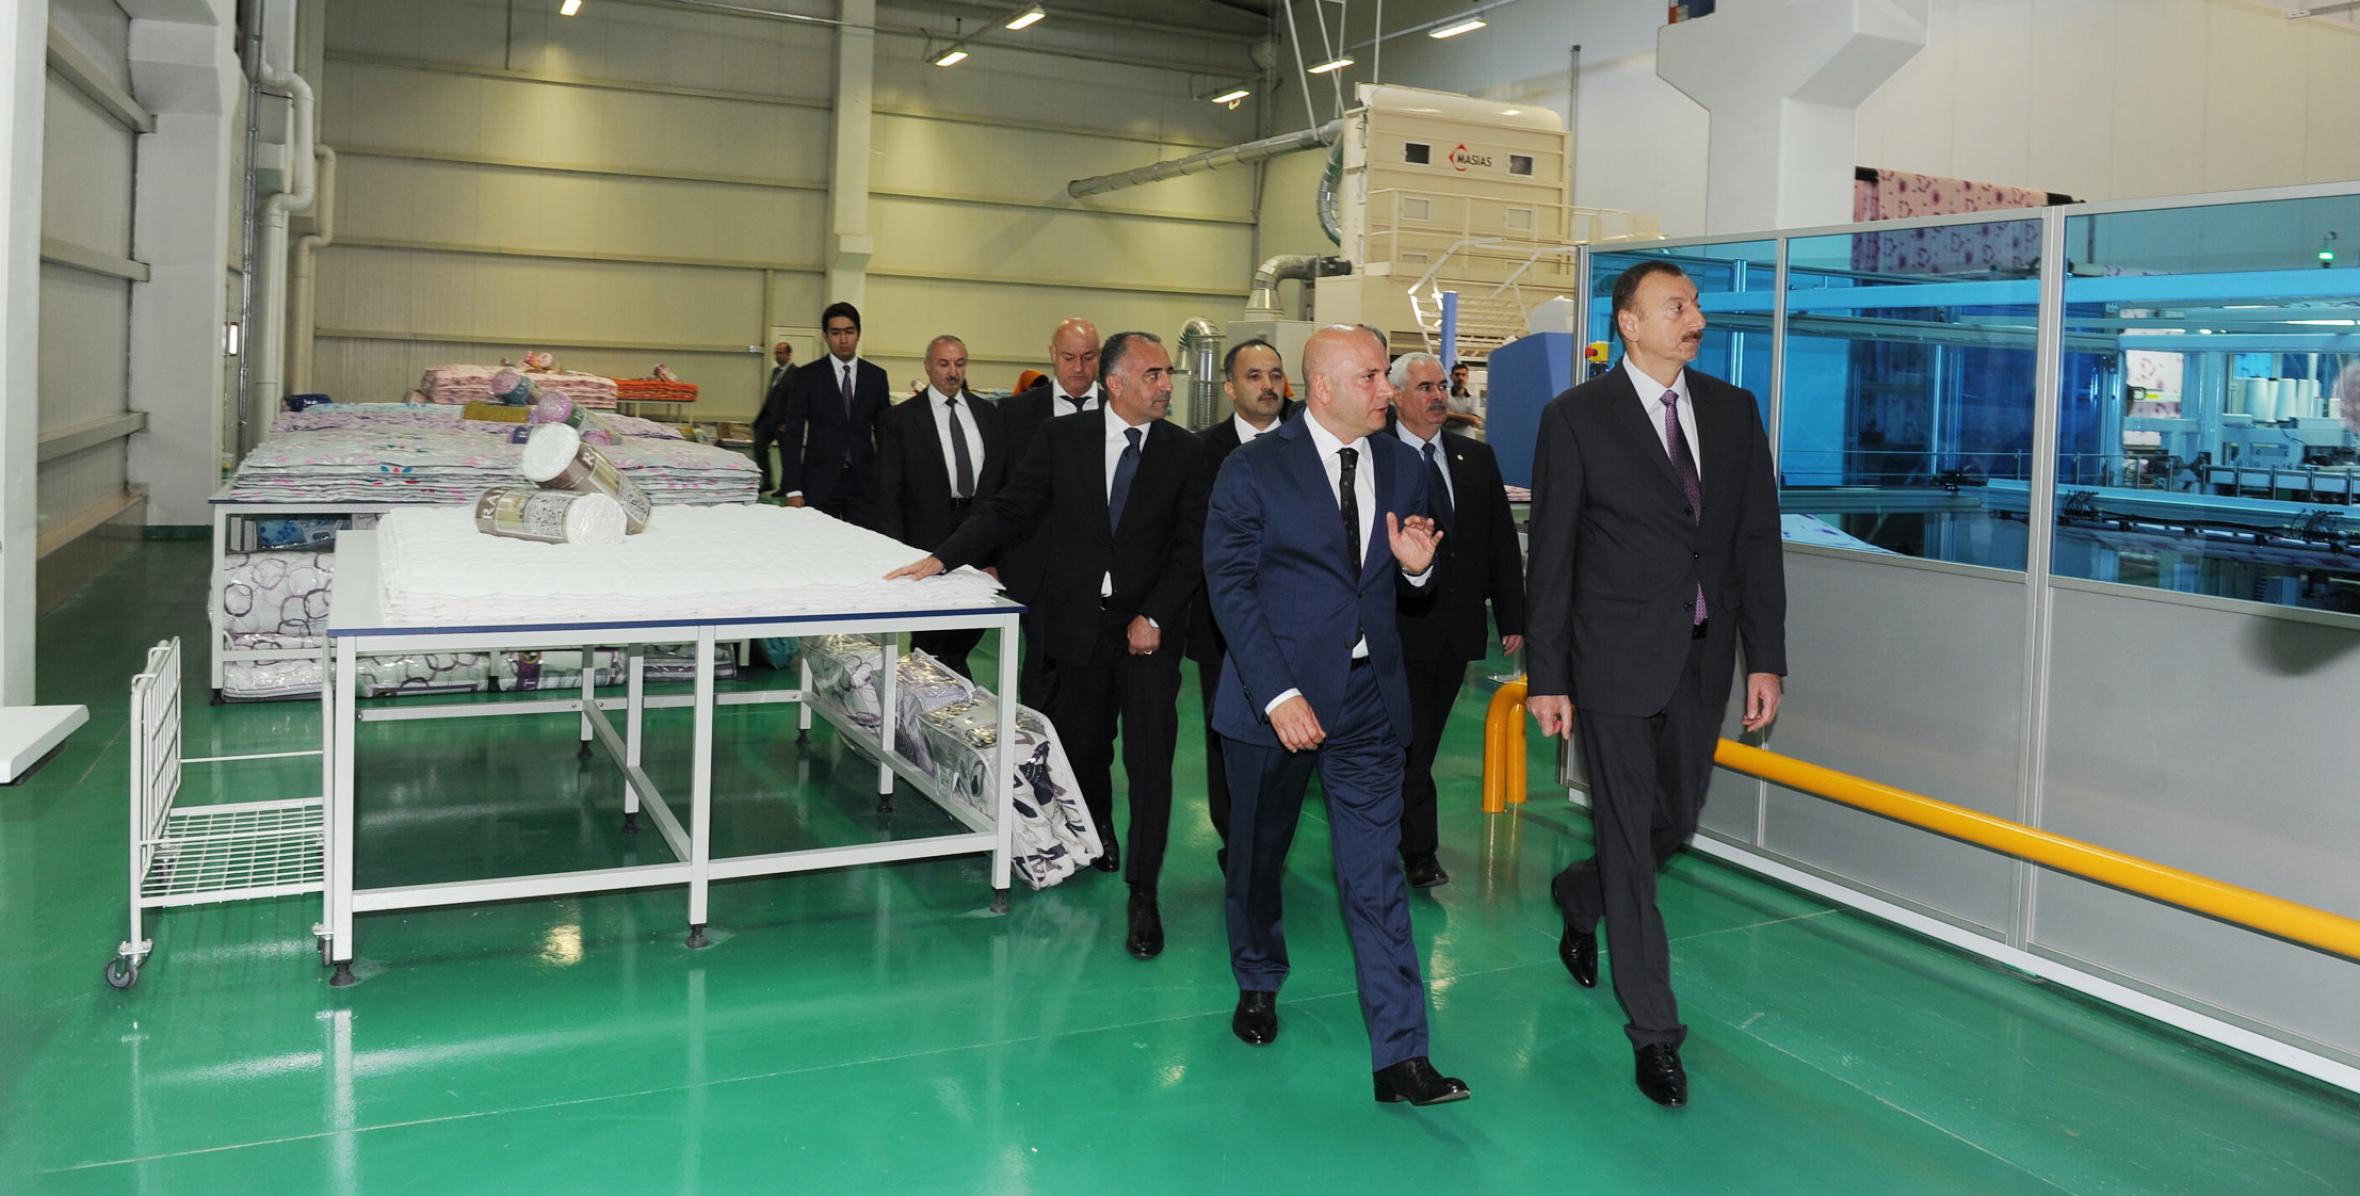 Ilham Aliyev attended the opening of the Gilan Textile Park in Sumgayit